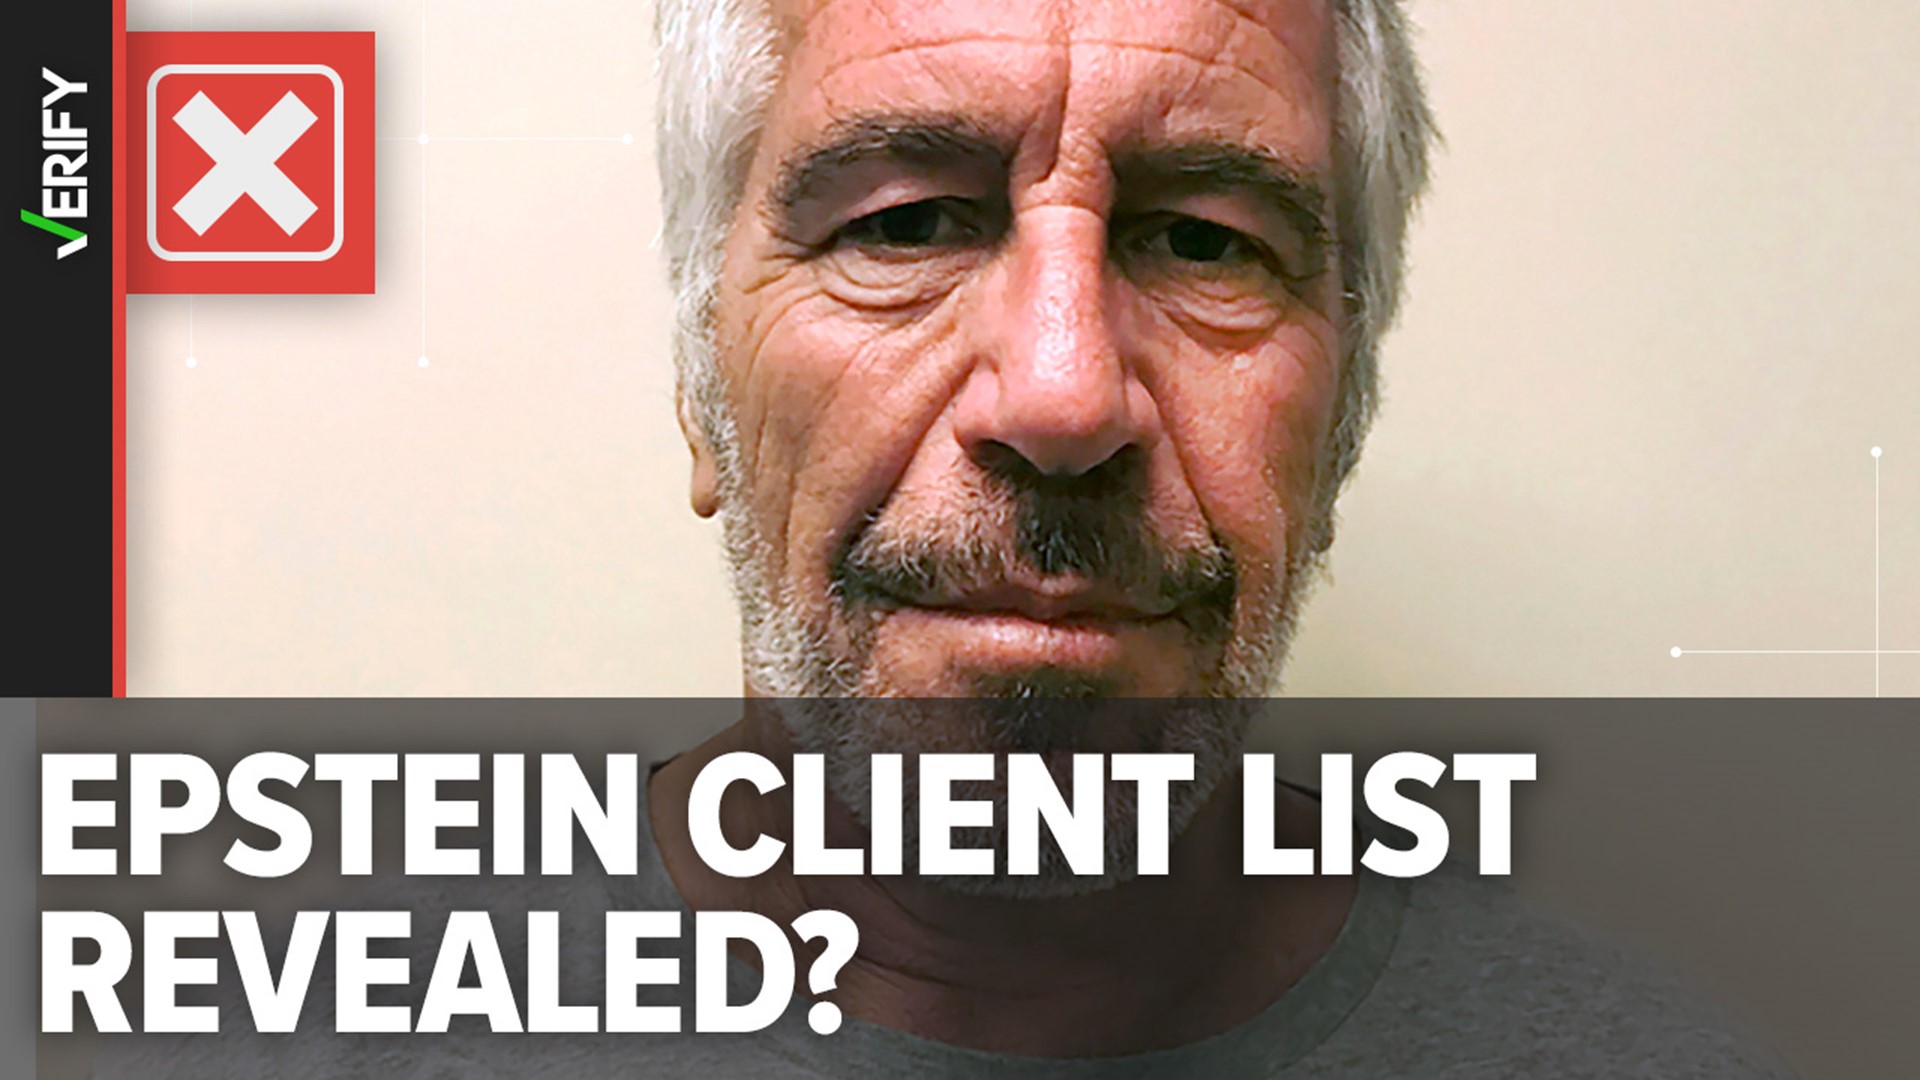 The names of more than 100 people associated with Jeffrey Epstein were unsealed in dozens of court documents. The names aren’t part of any client list.